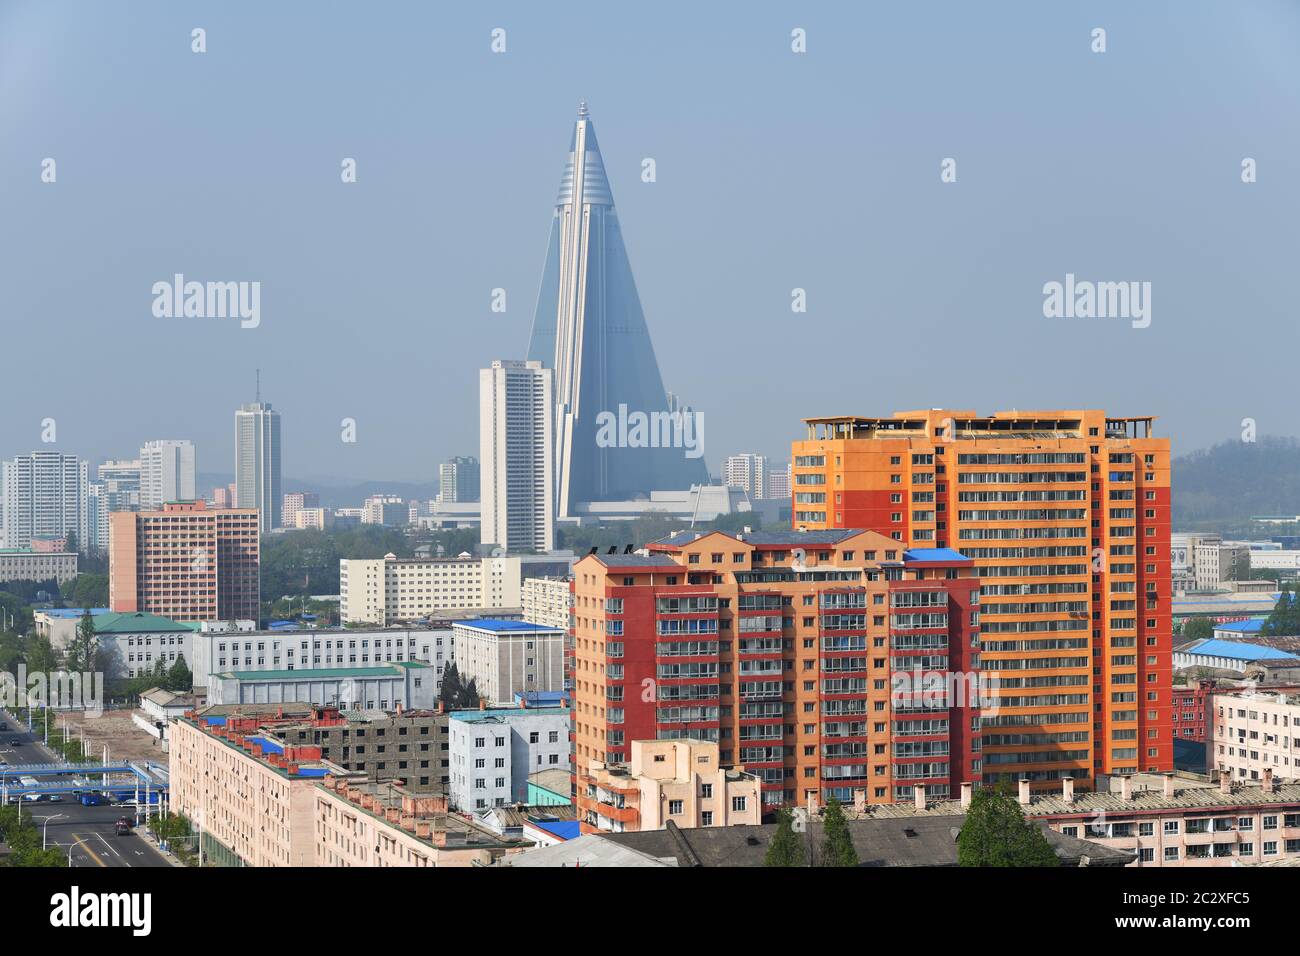 North Korea, Pyongyang - May 1, 2019: View on the Ryugyong Hotel, an unfinished 105-story pyramid-shaped skyscraper & the first tall building in Pyong Stock Photo